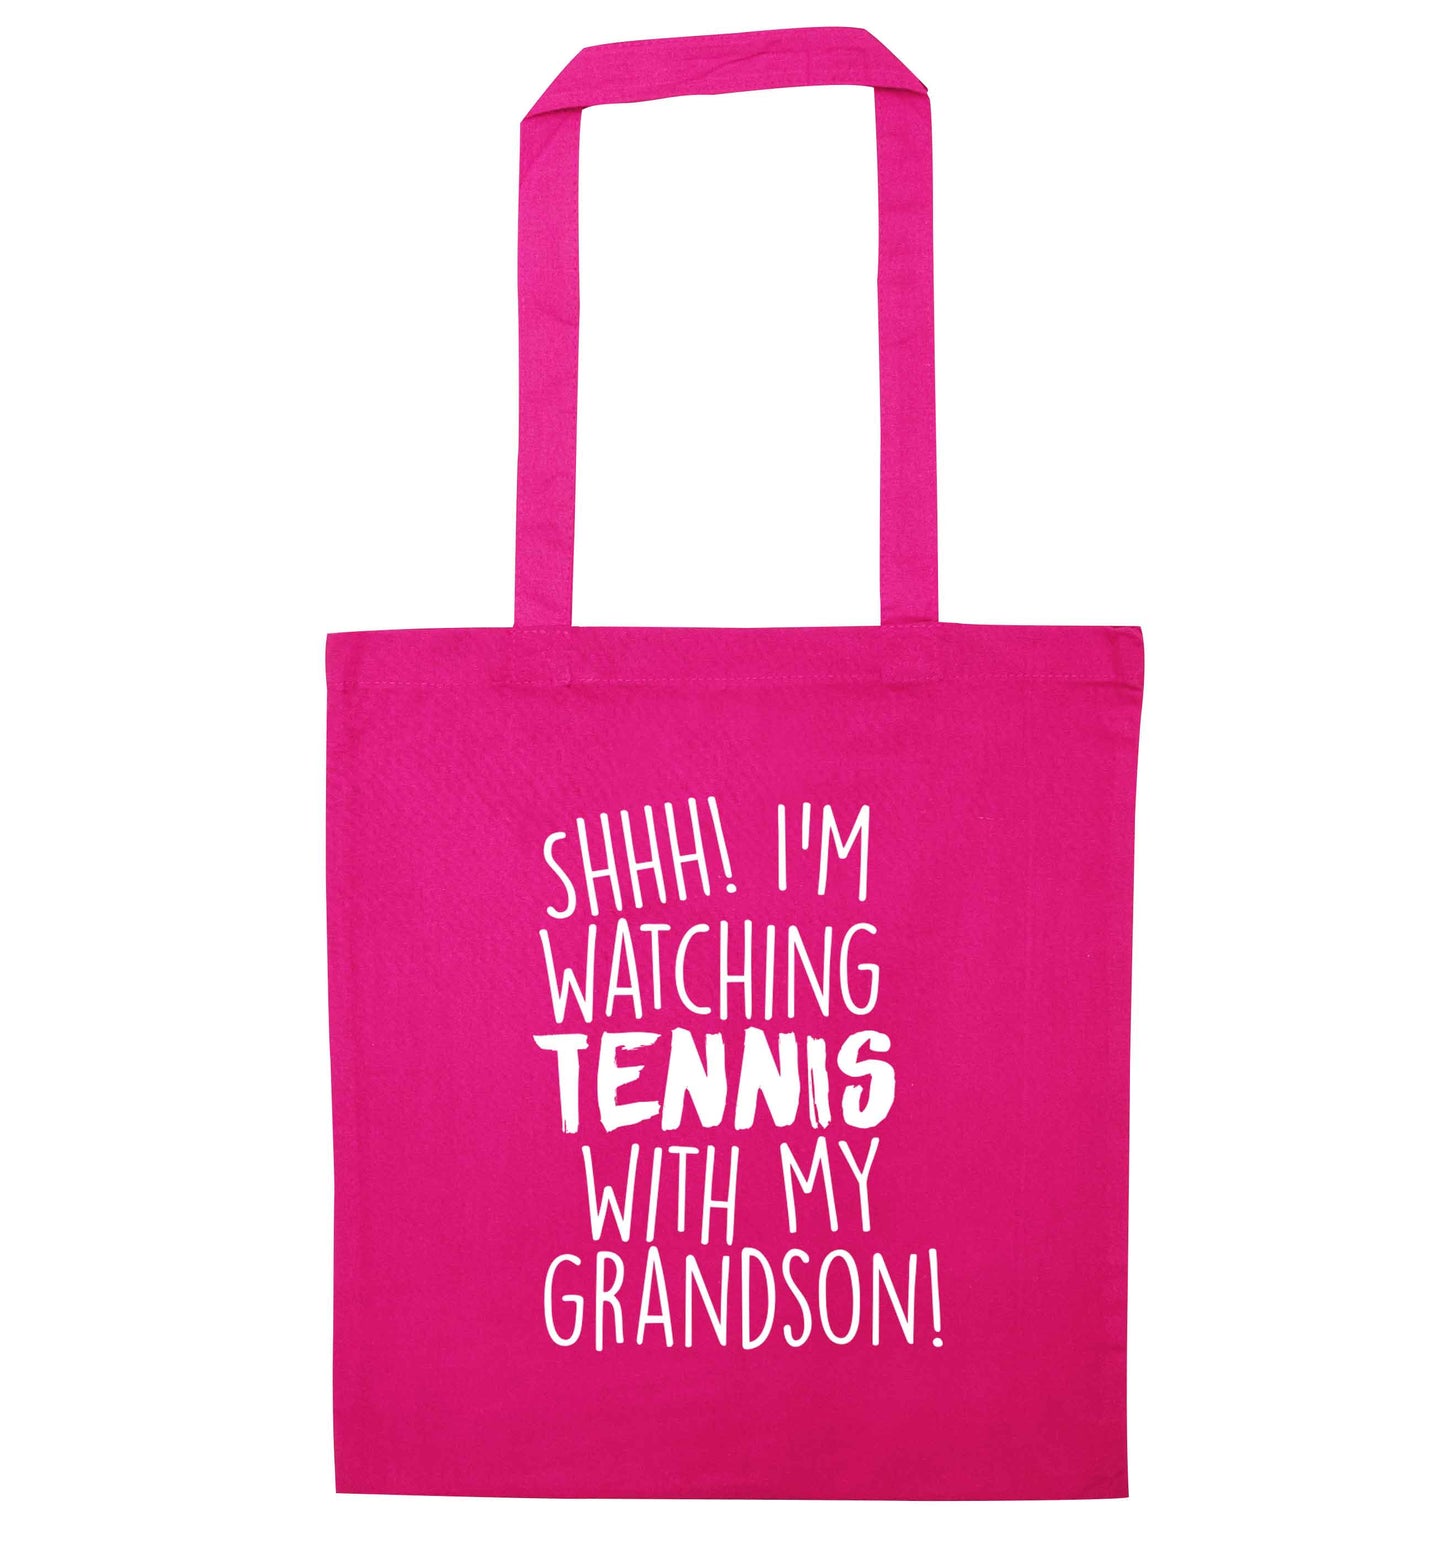 Shh! I'm watching tennis with my grandson! pink tote bag